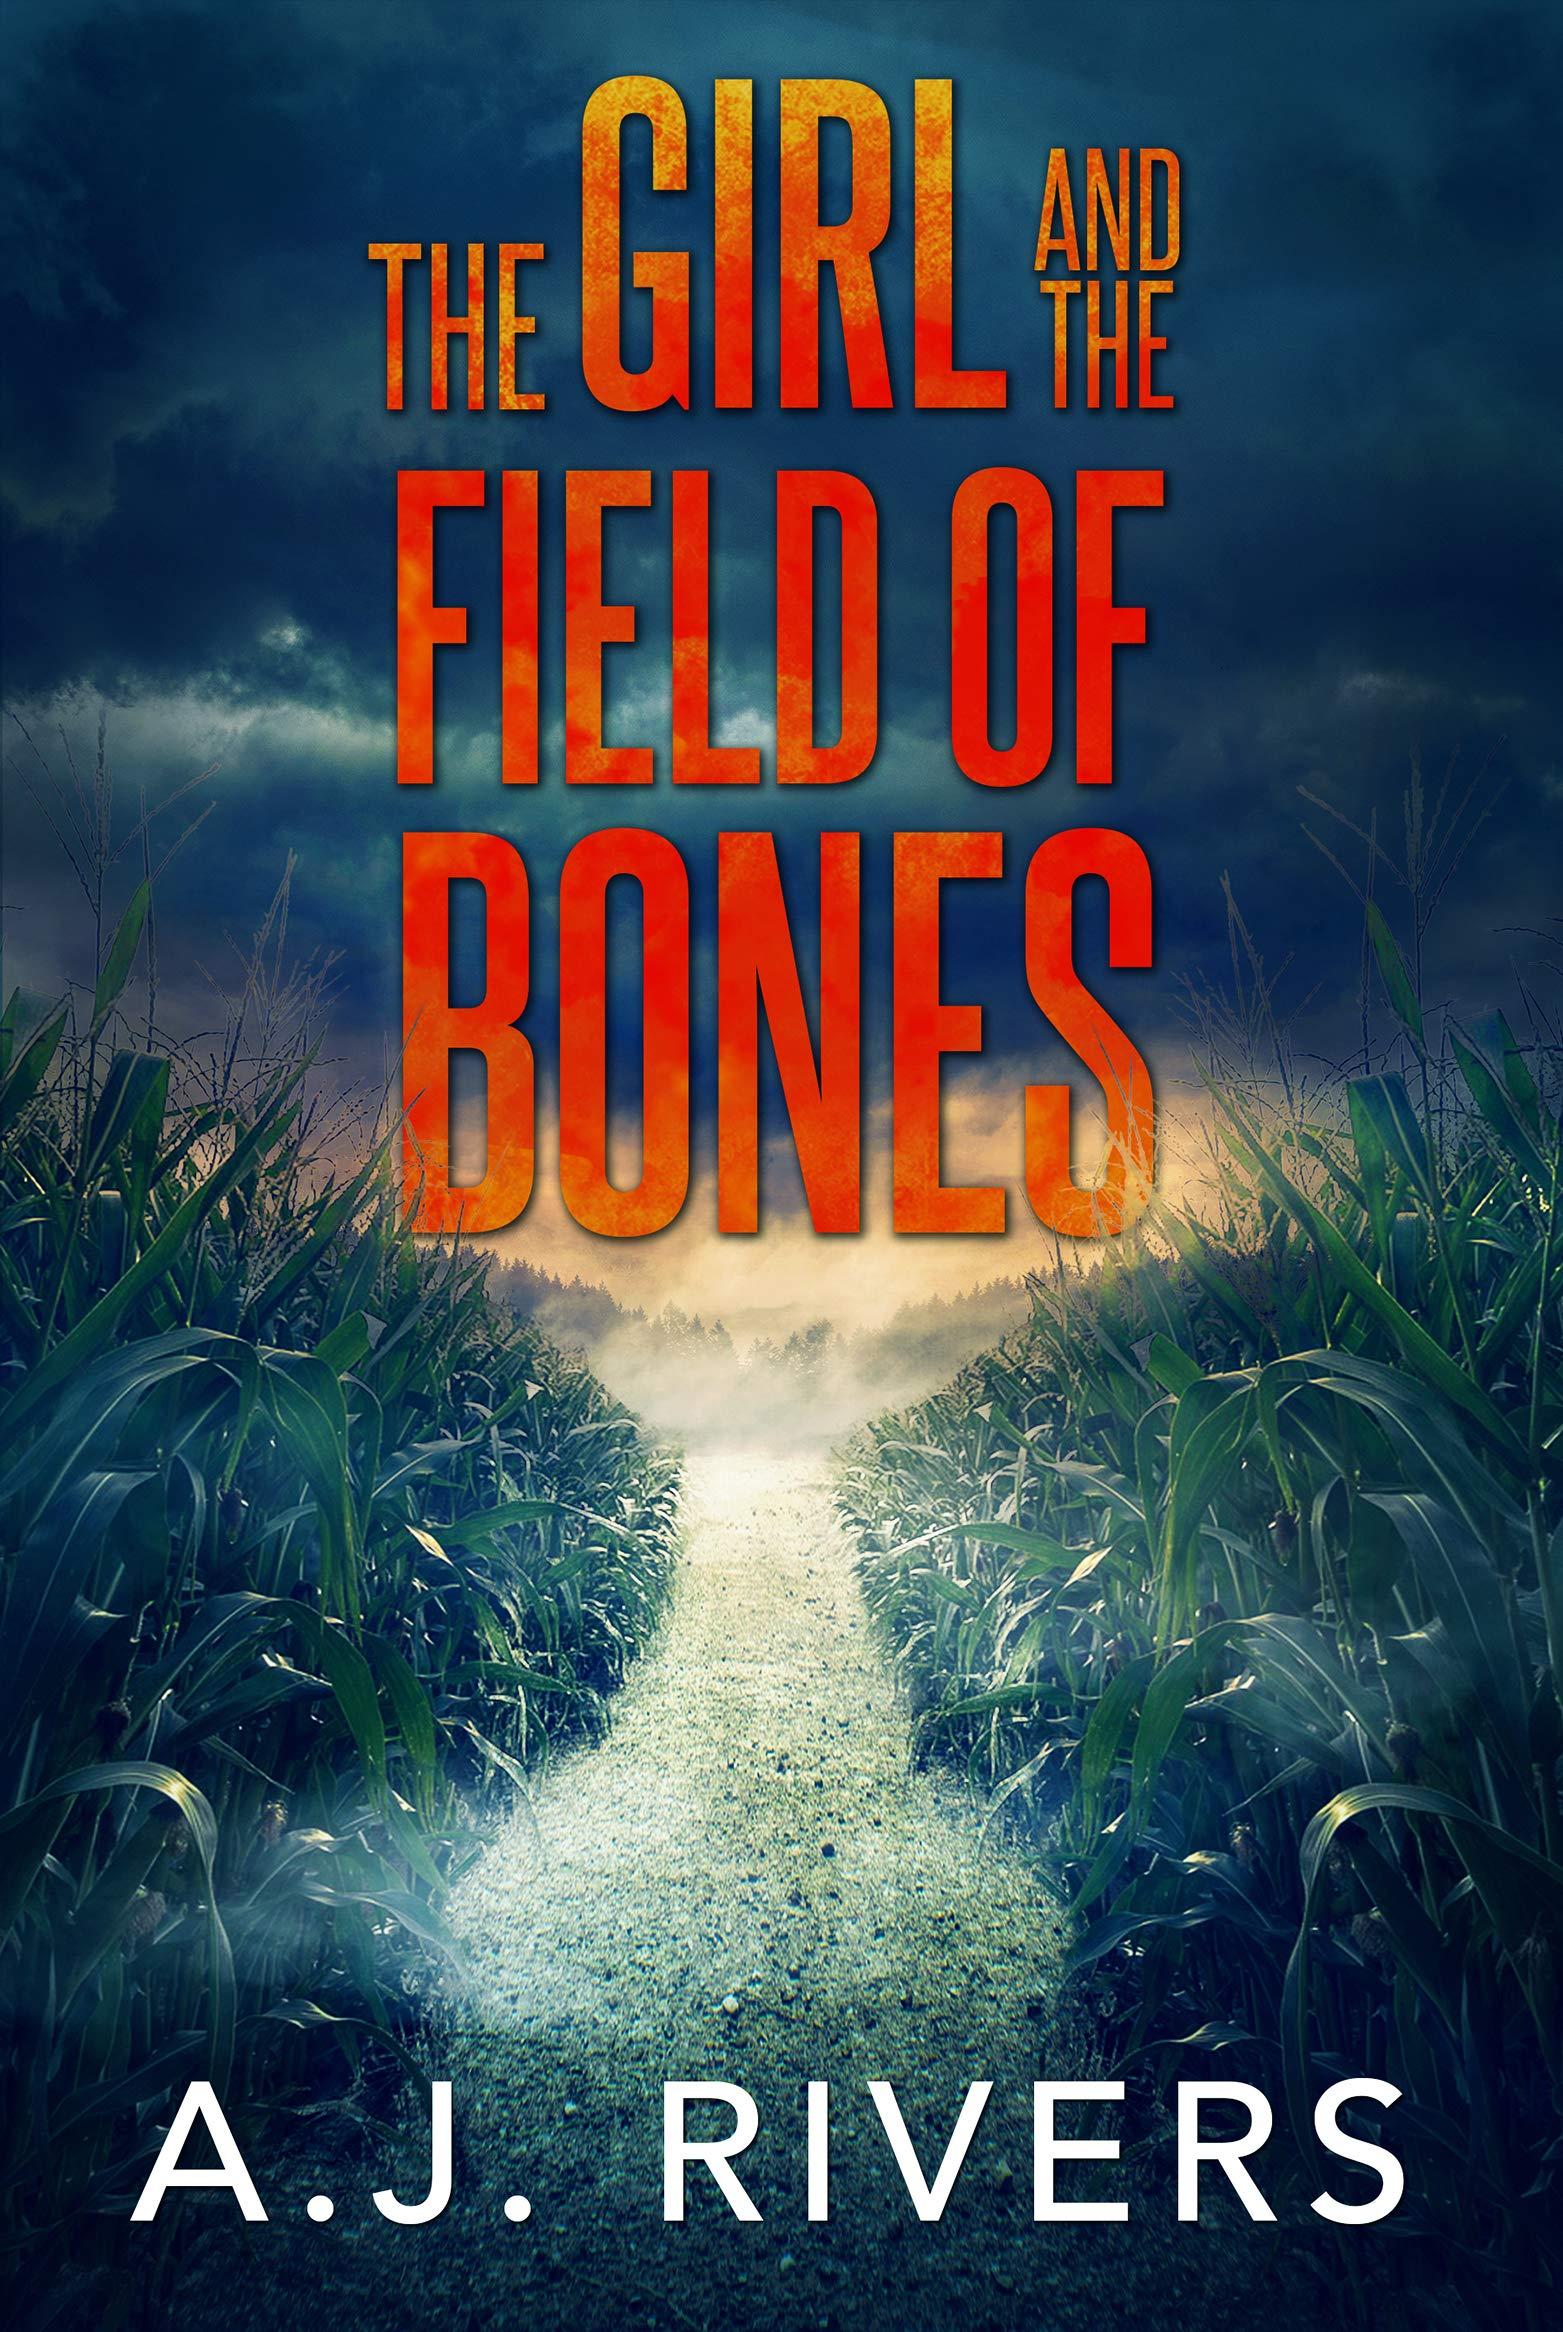 The Girl and the Field of Bones